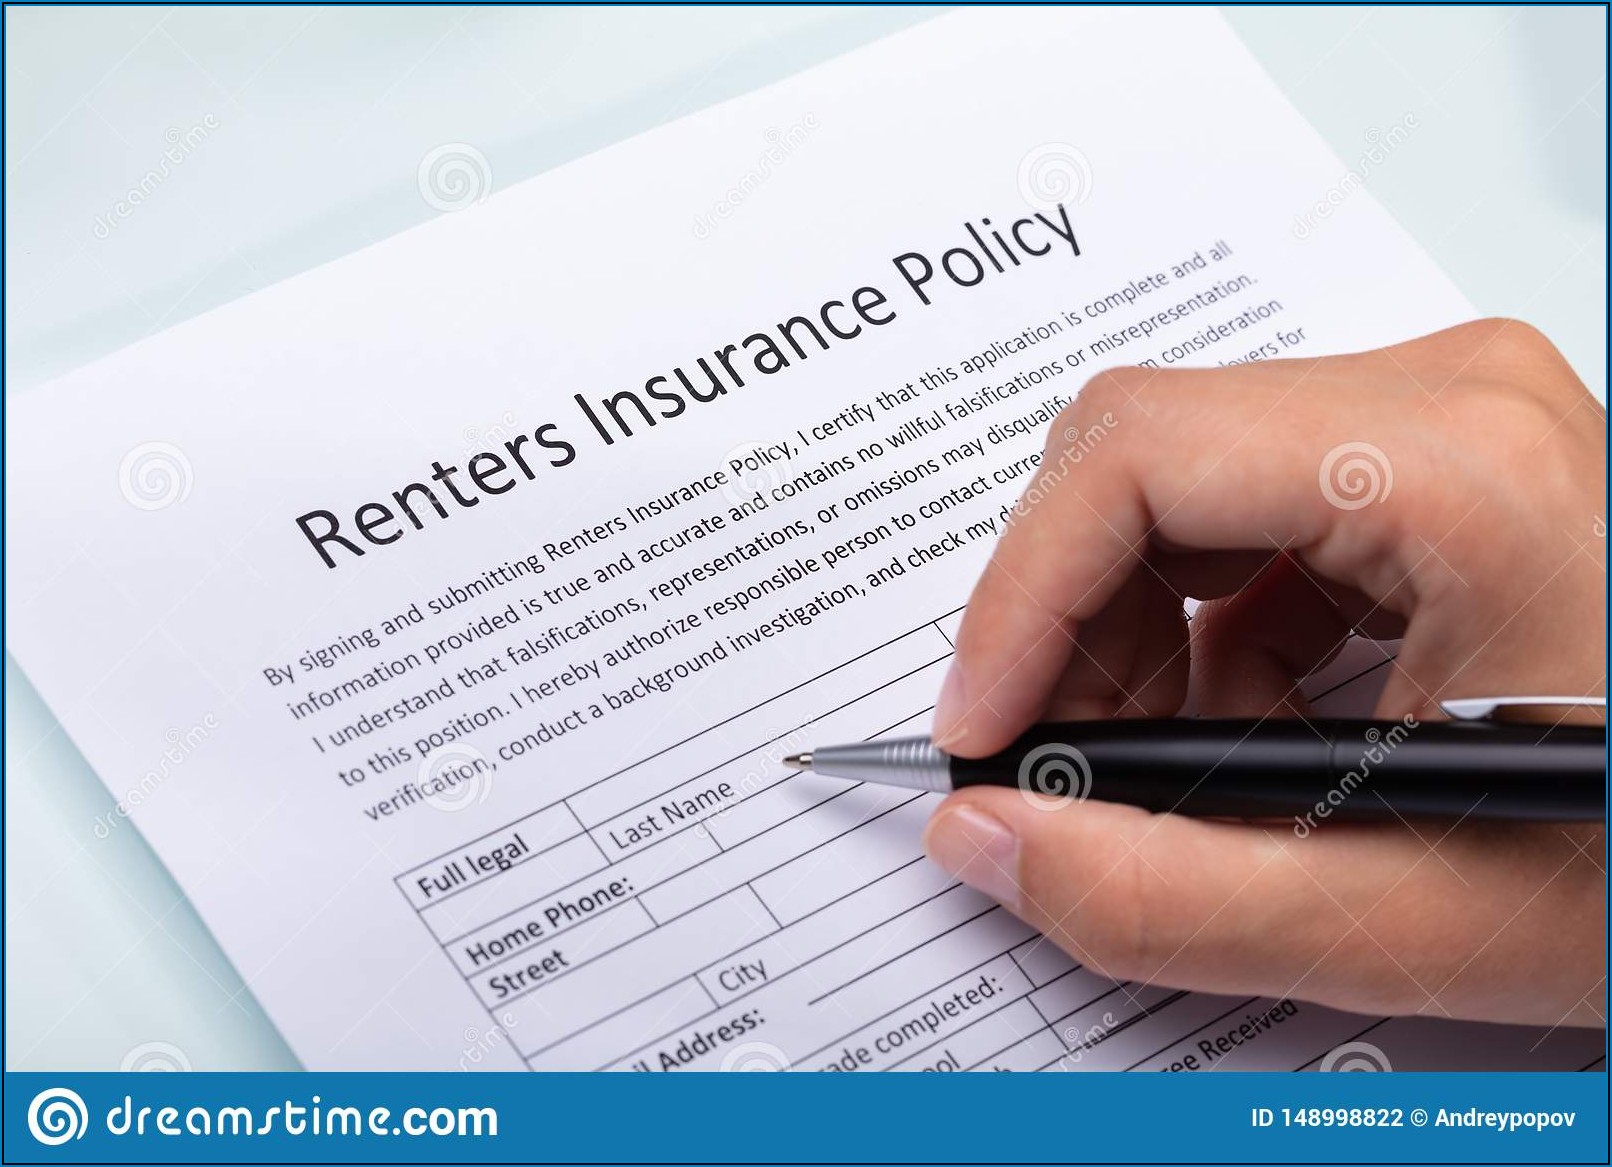 Renters Insurance Policy Form